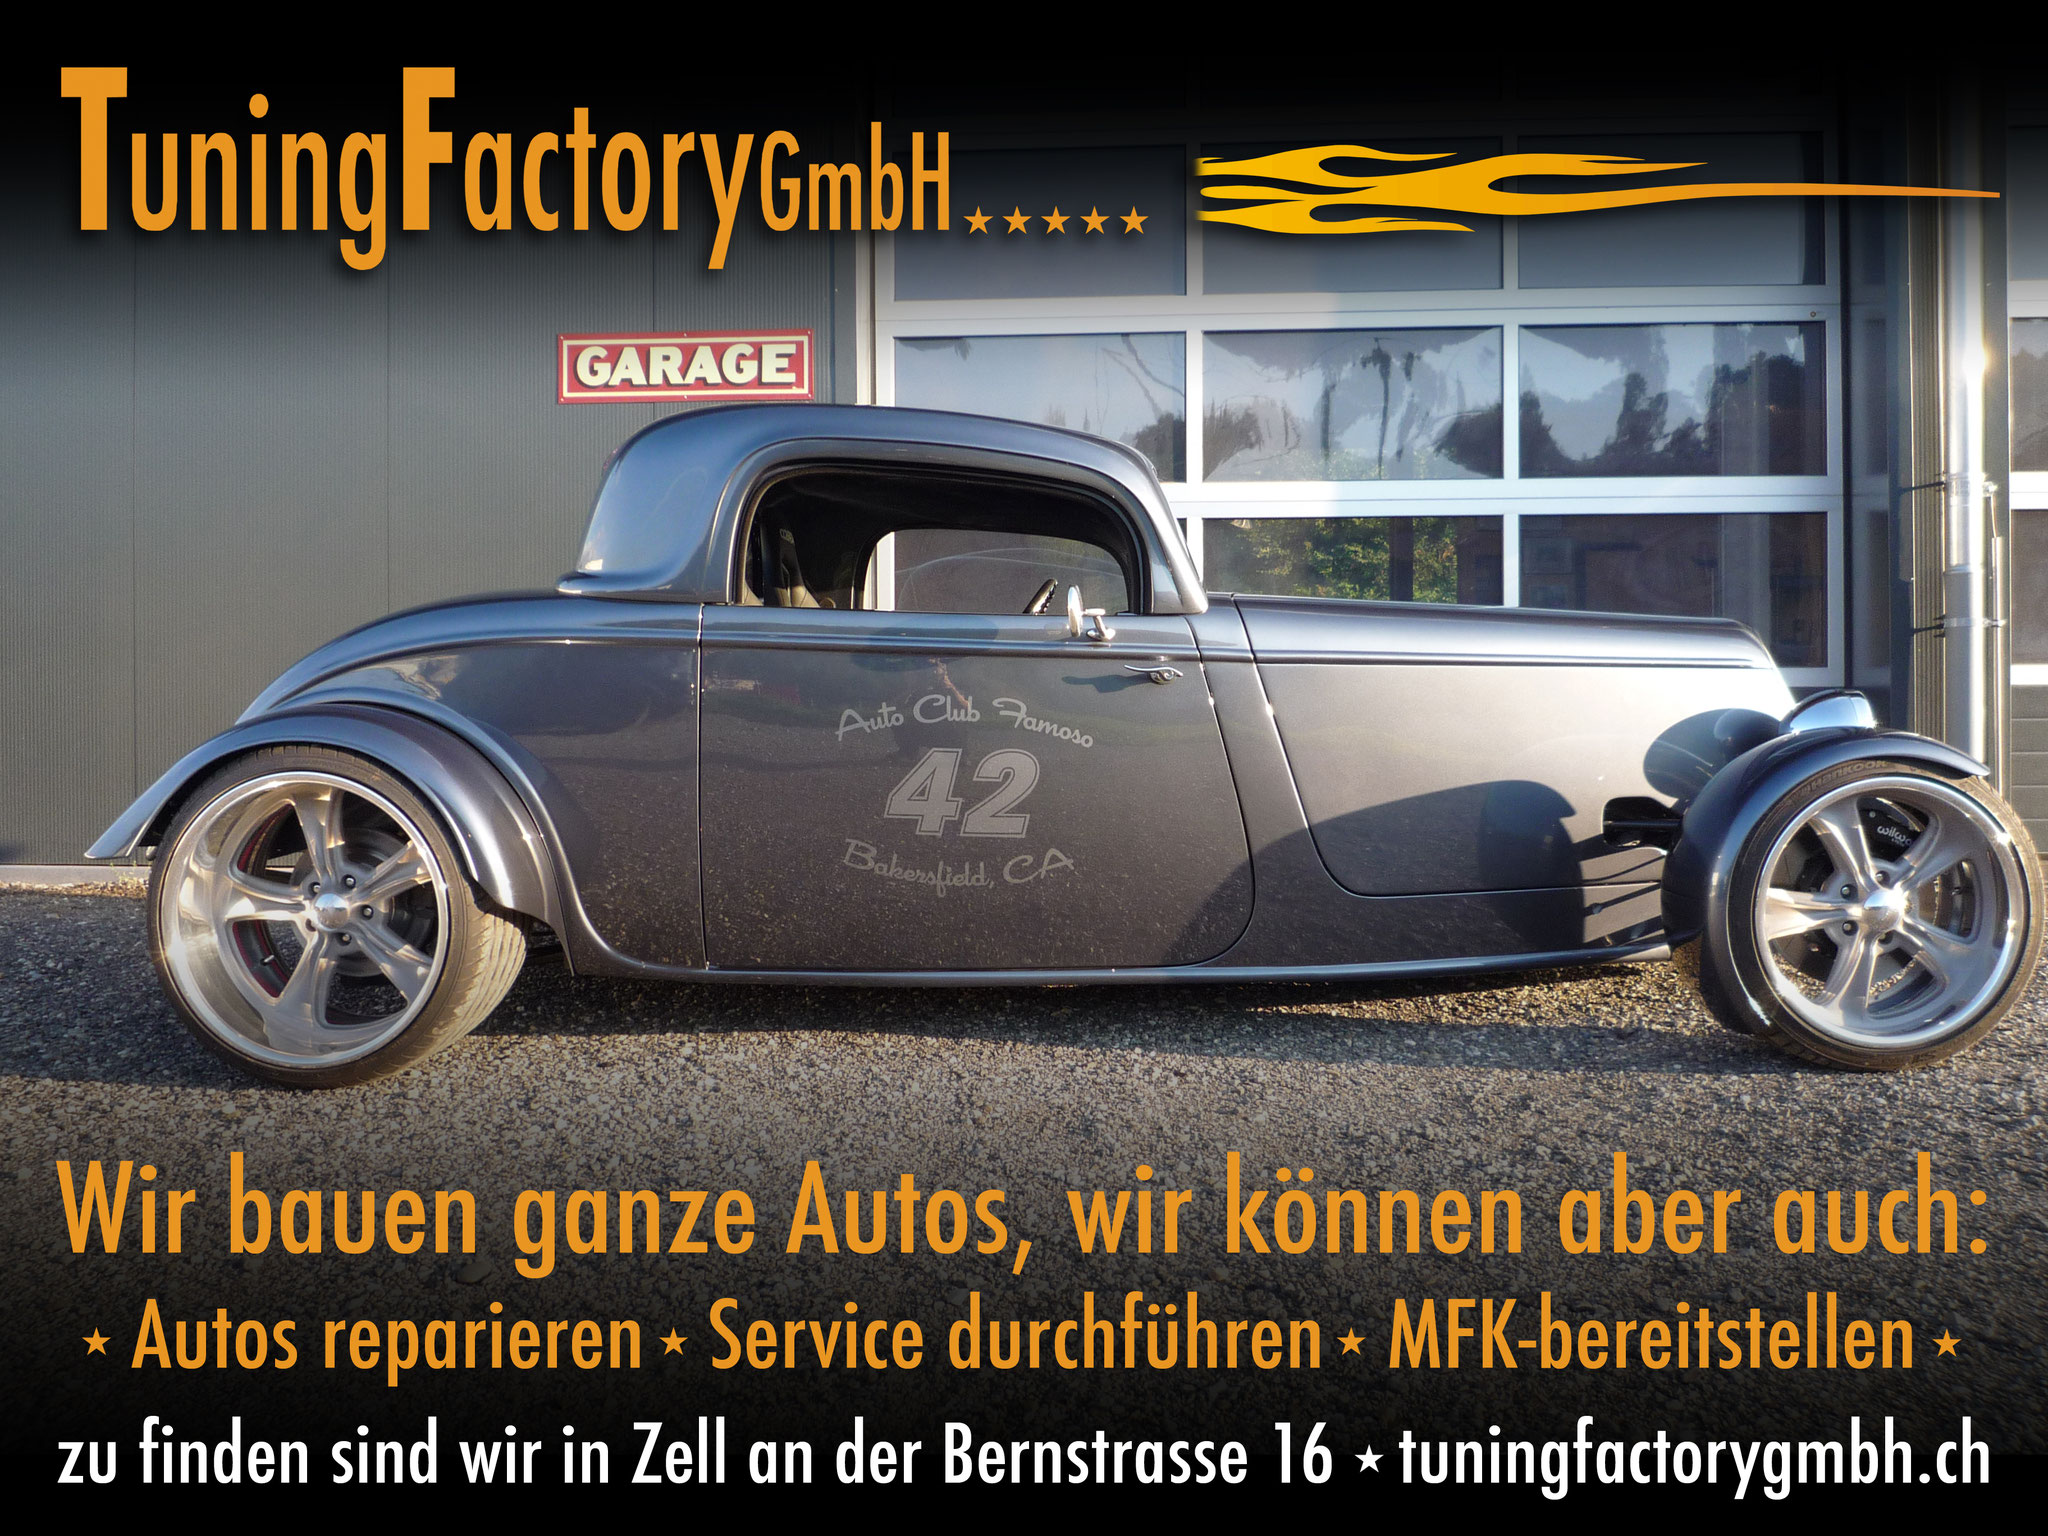 Tuning Factory GmbH, Zell